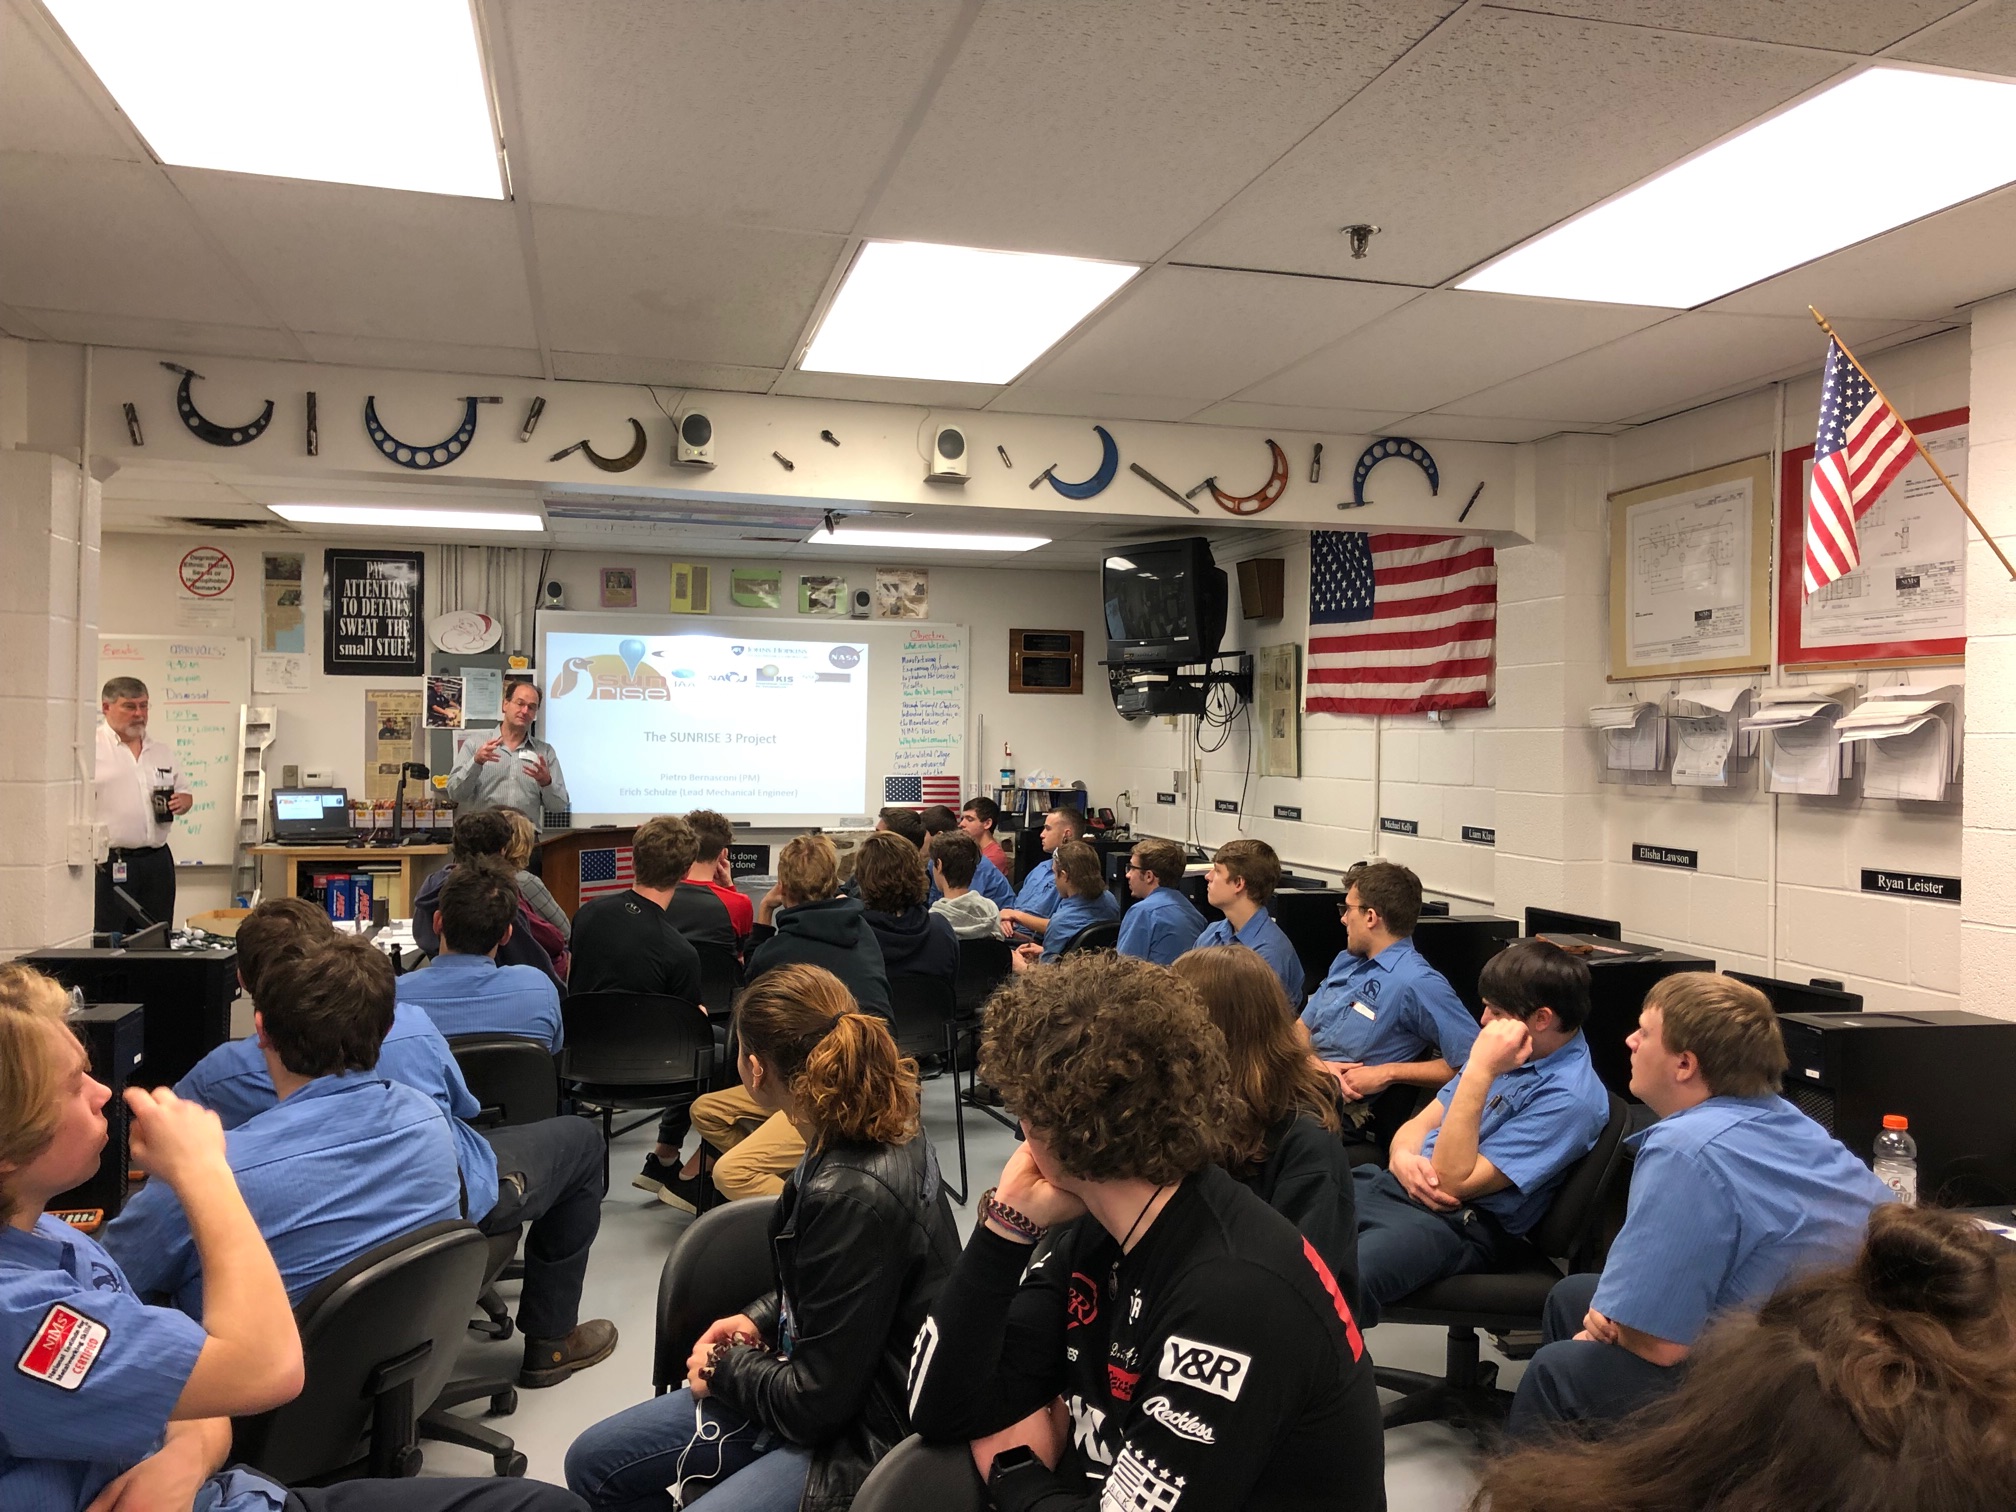 Erich Schulze, a mechanical engineer at Johns Hopkins APL, gives a presentation about the science and design of NASA’s SUNRISE 3 mission to a classroom of technology students.